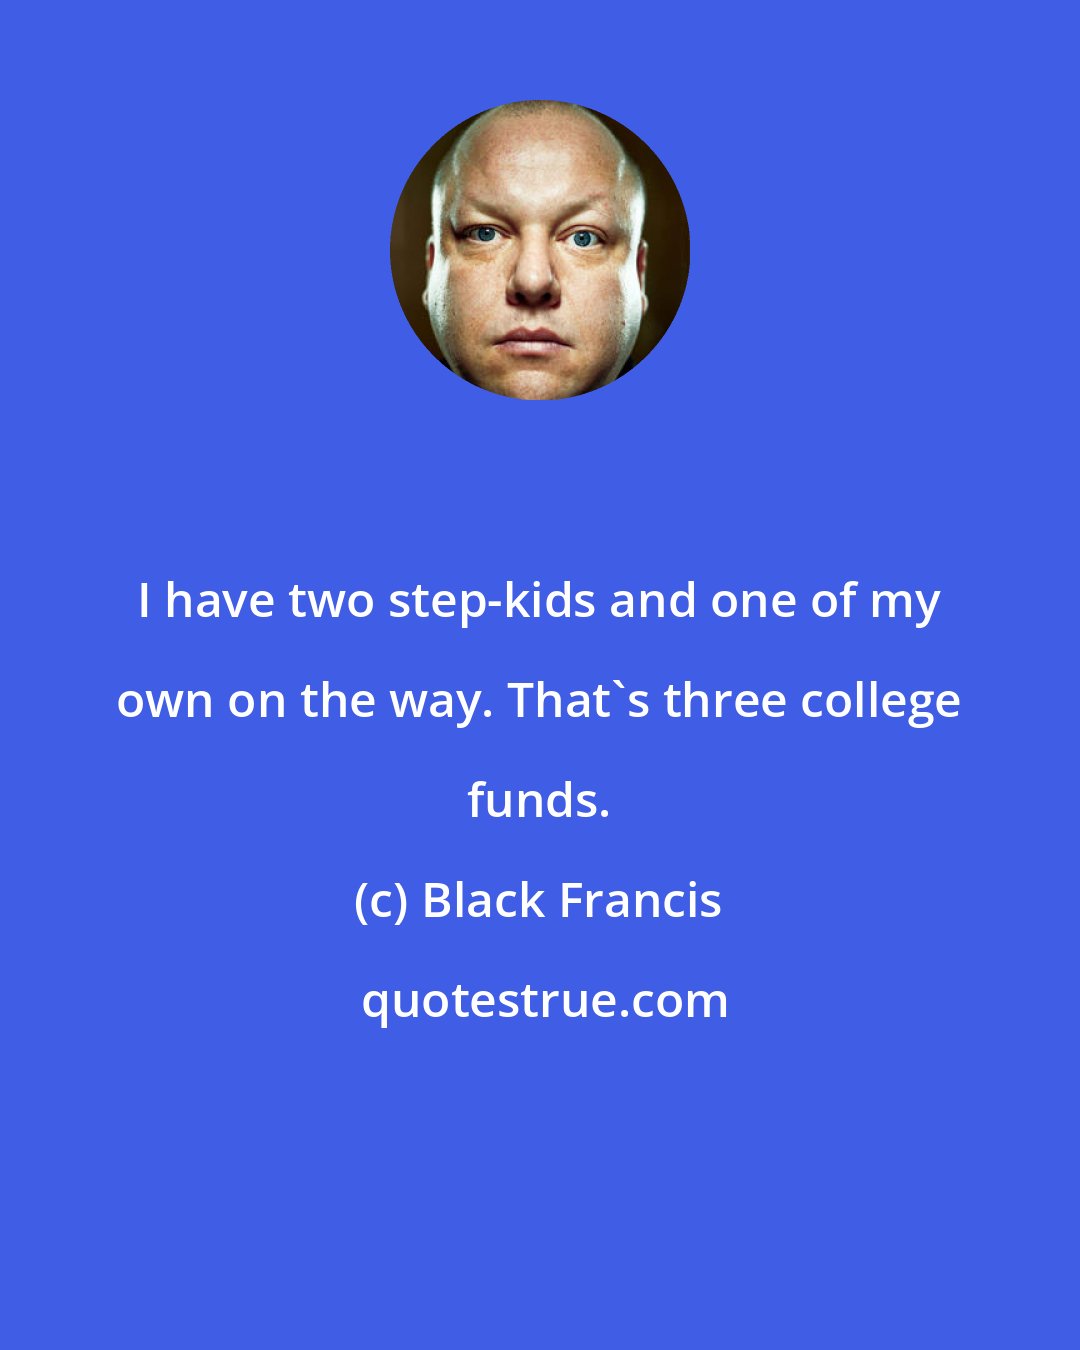 Black Francis: I have two step-kids and one of my own on the way. That's three college funds.